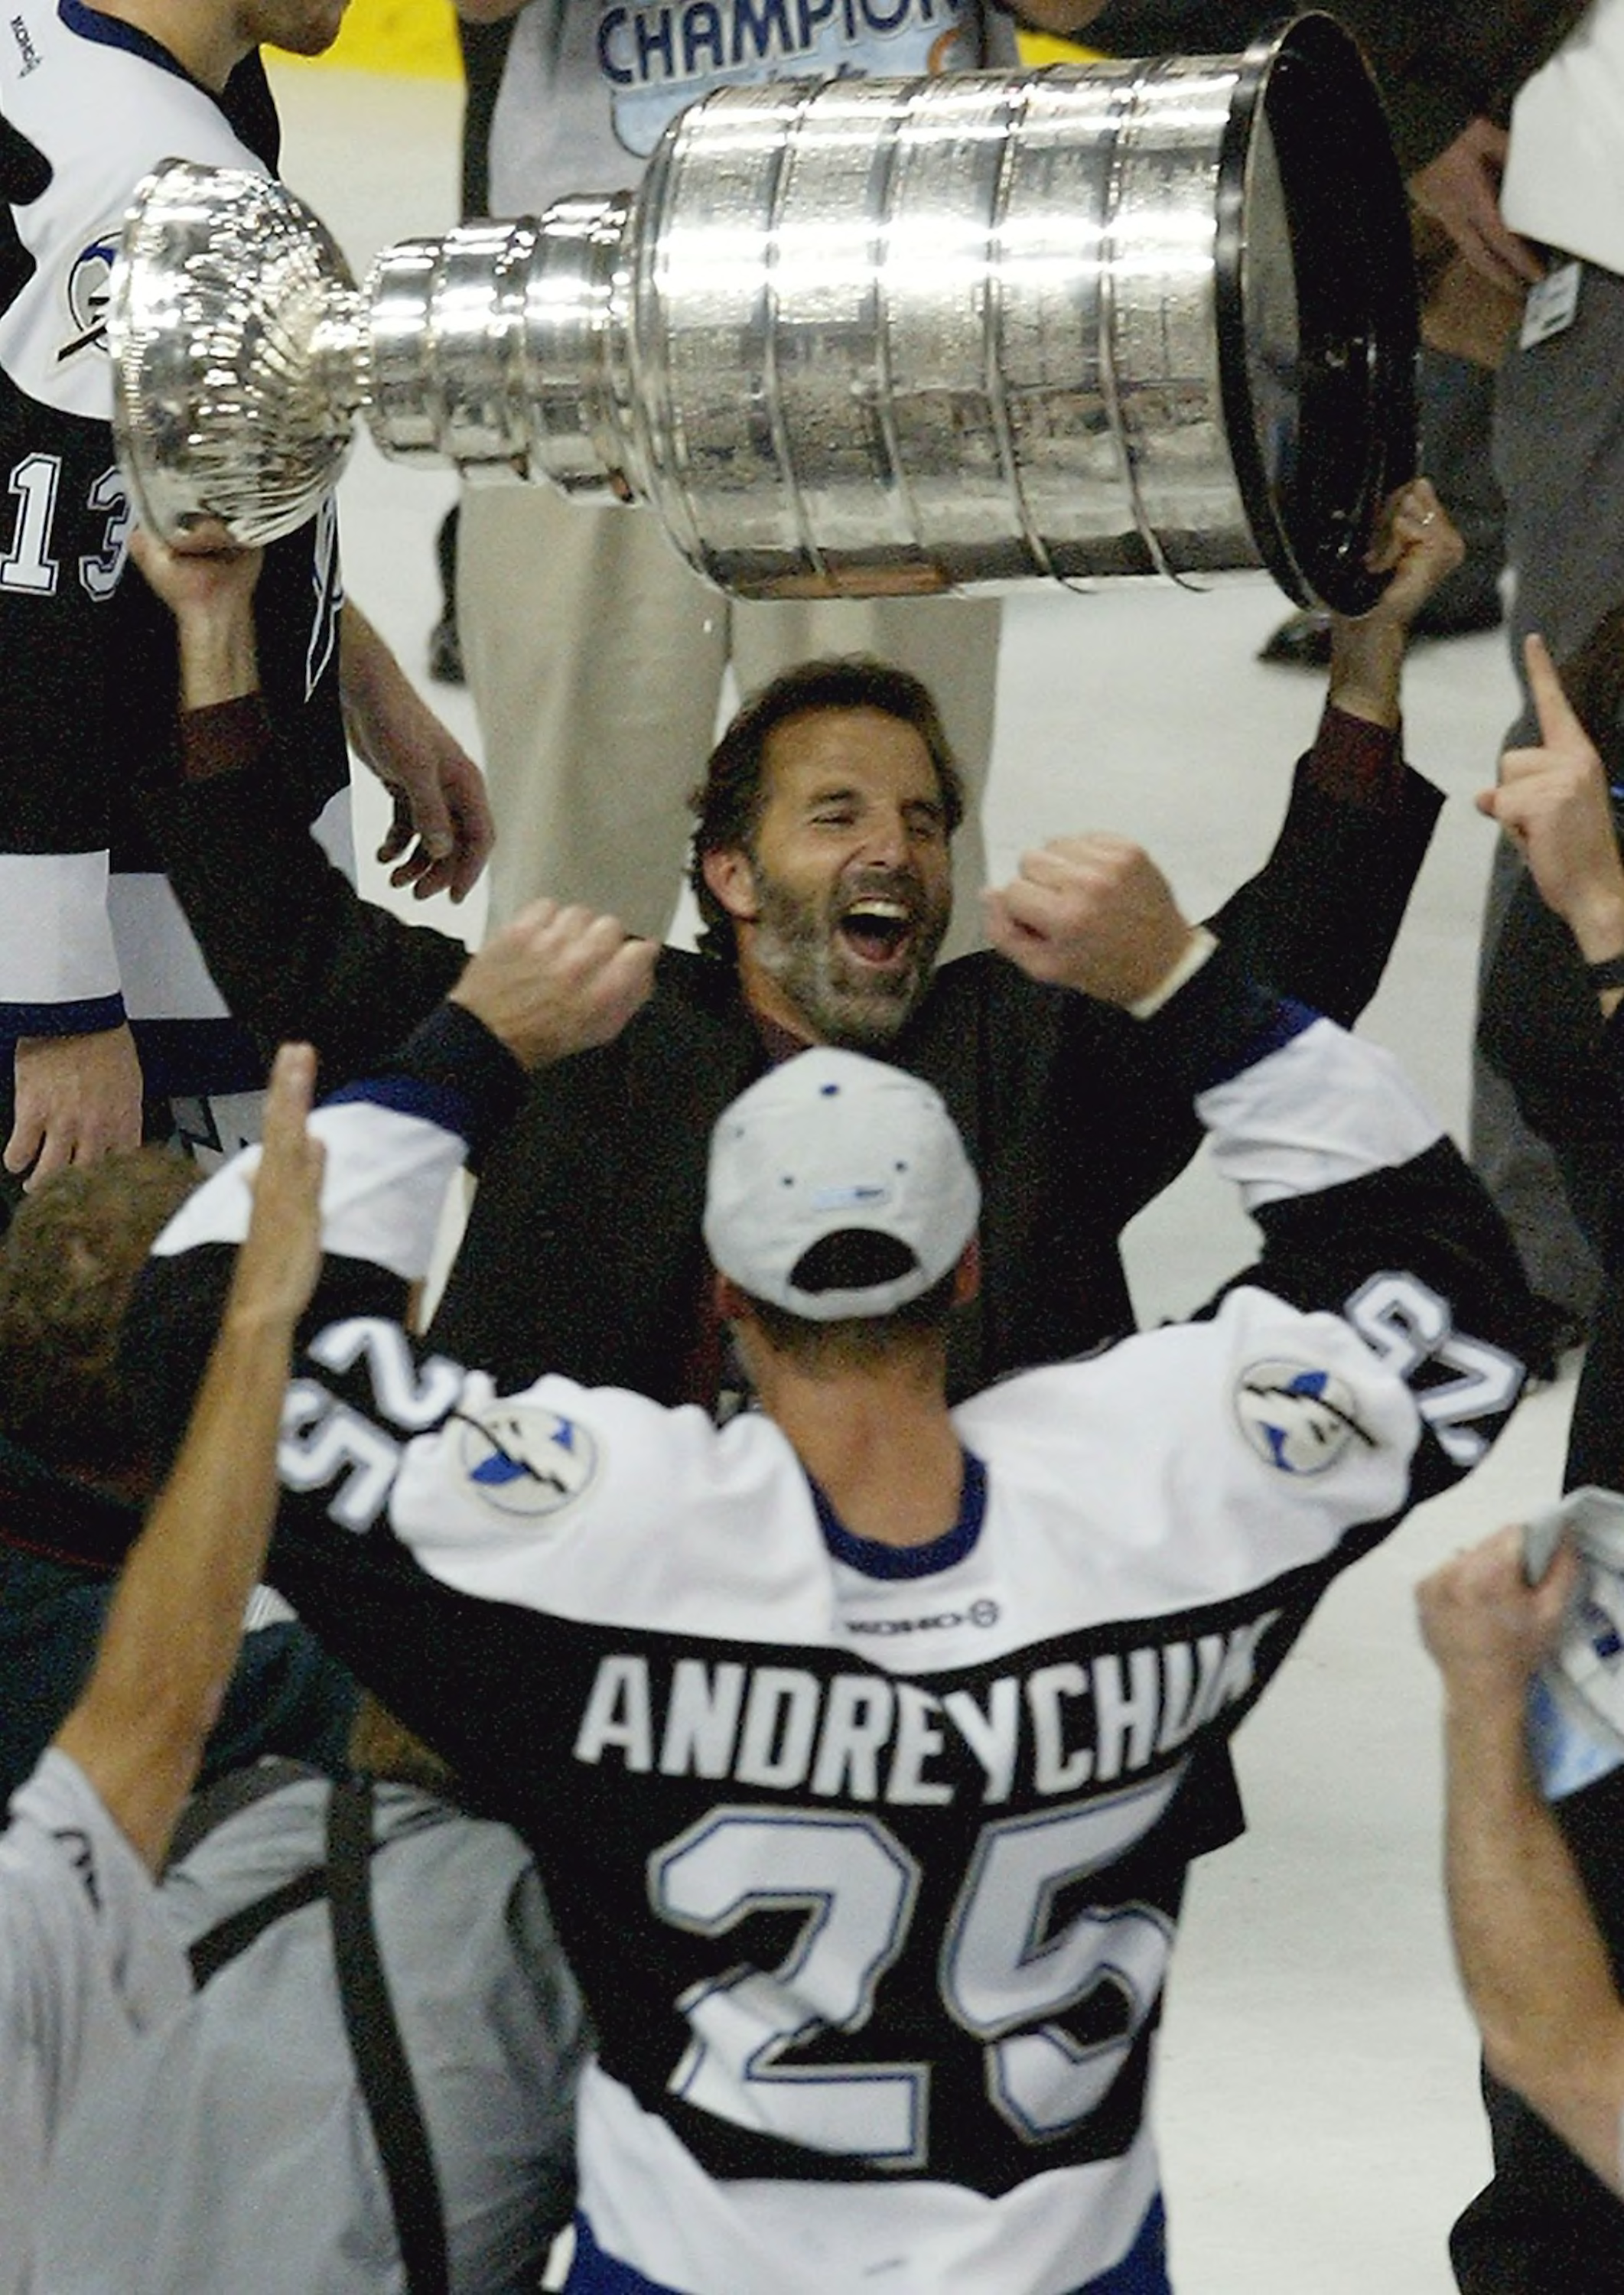 Dave Andreychuk Stanley Cup Champion 2004 Tampa Bay Lightning